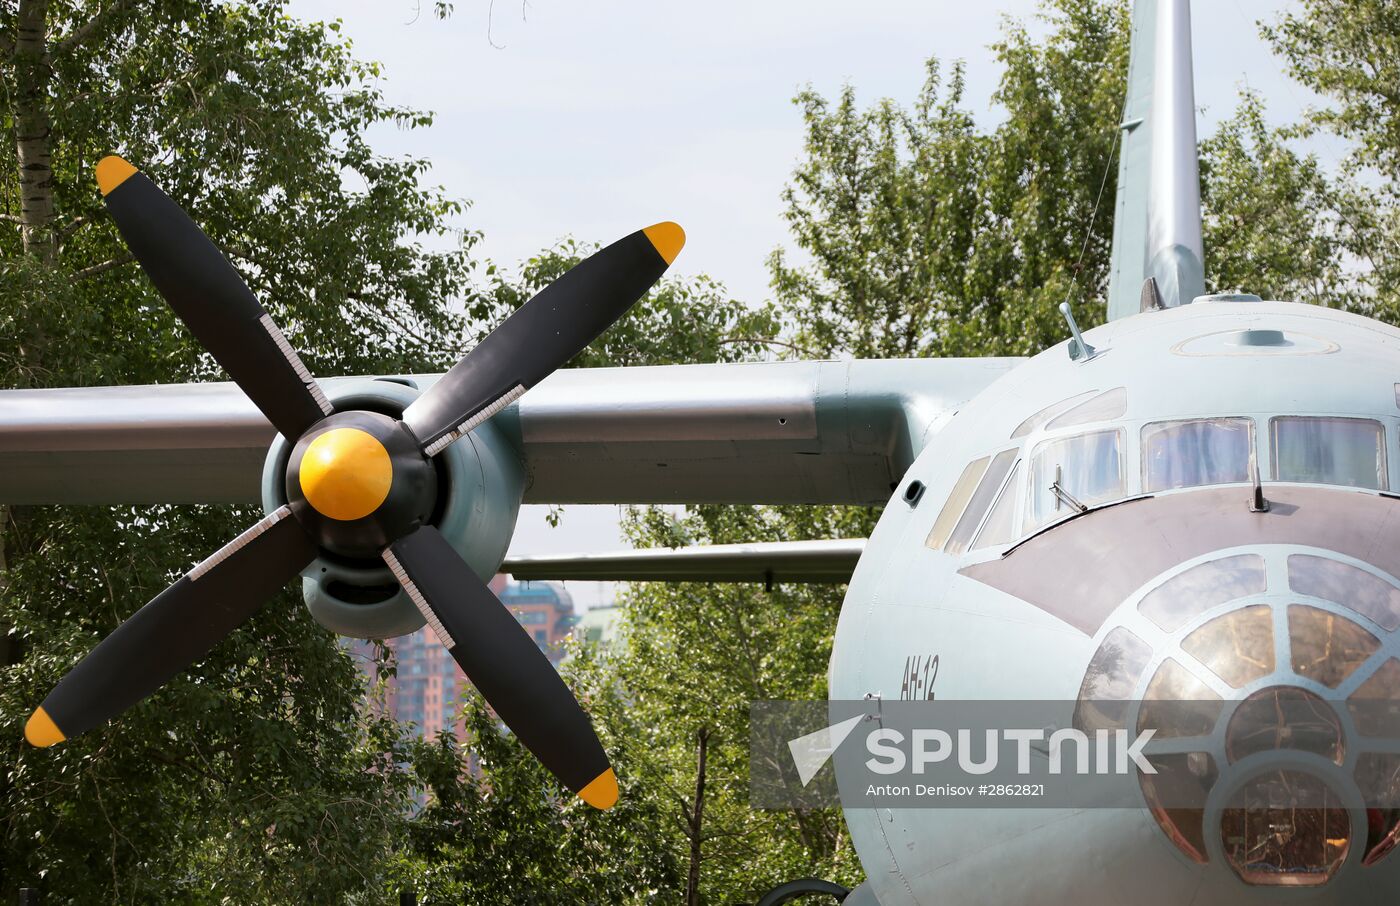 An-12 military transport aircraft donated to museum